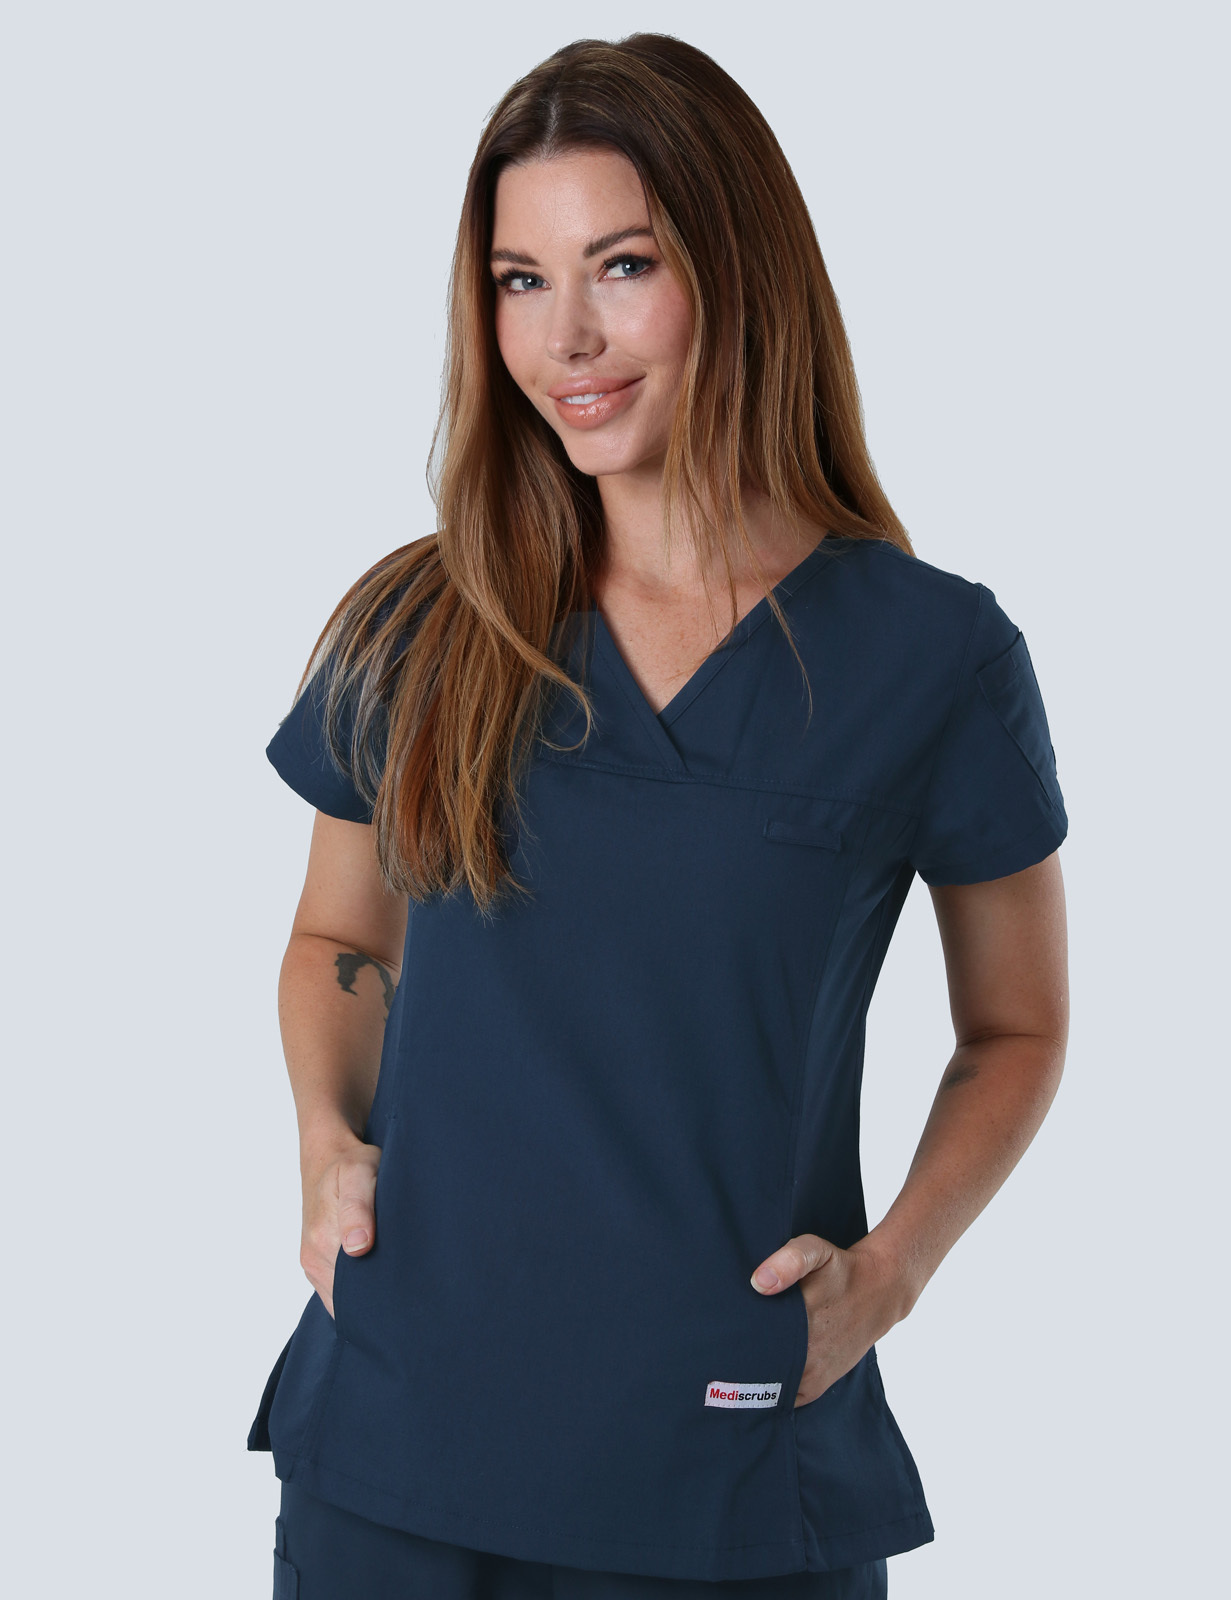 The Alfred Hospital - Emergency Department (Women's Fit Solid Scrub Top in Navy incl Logos)